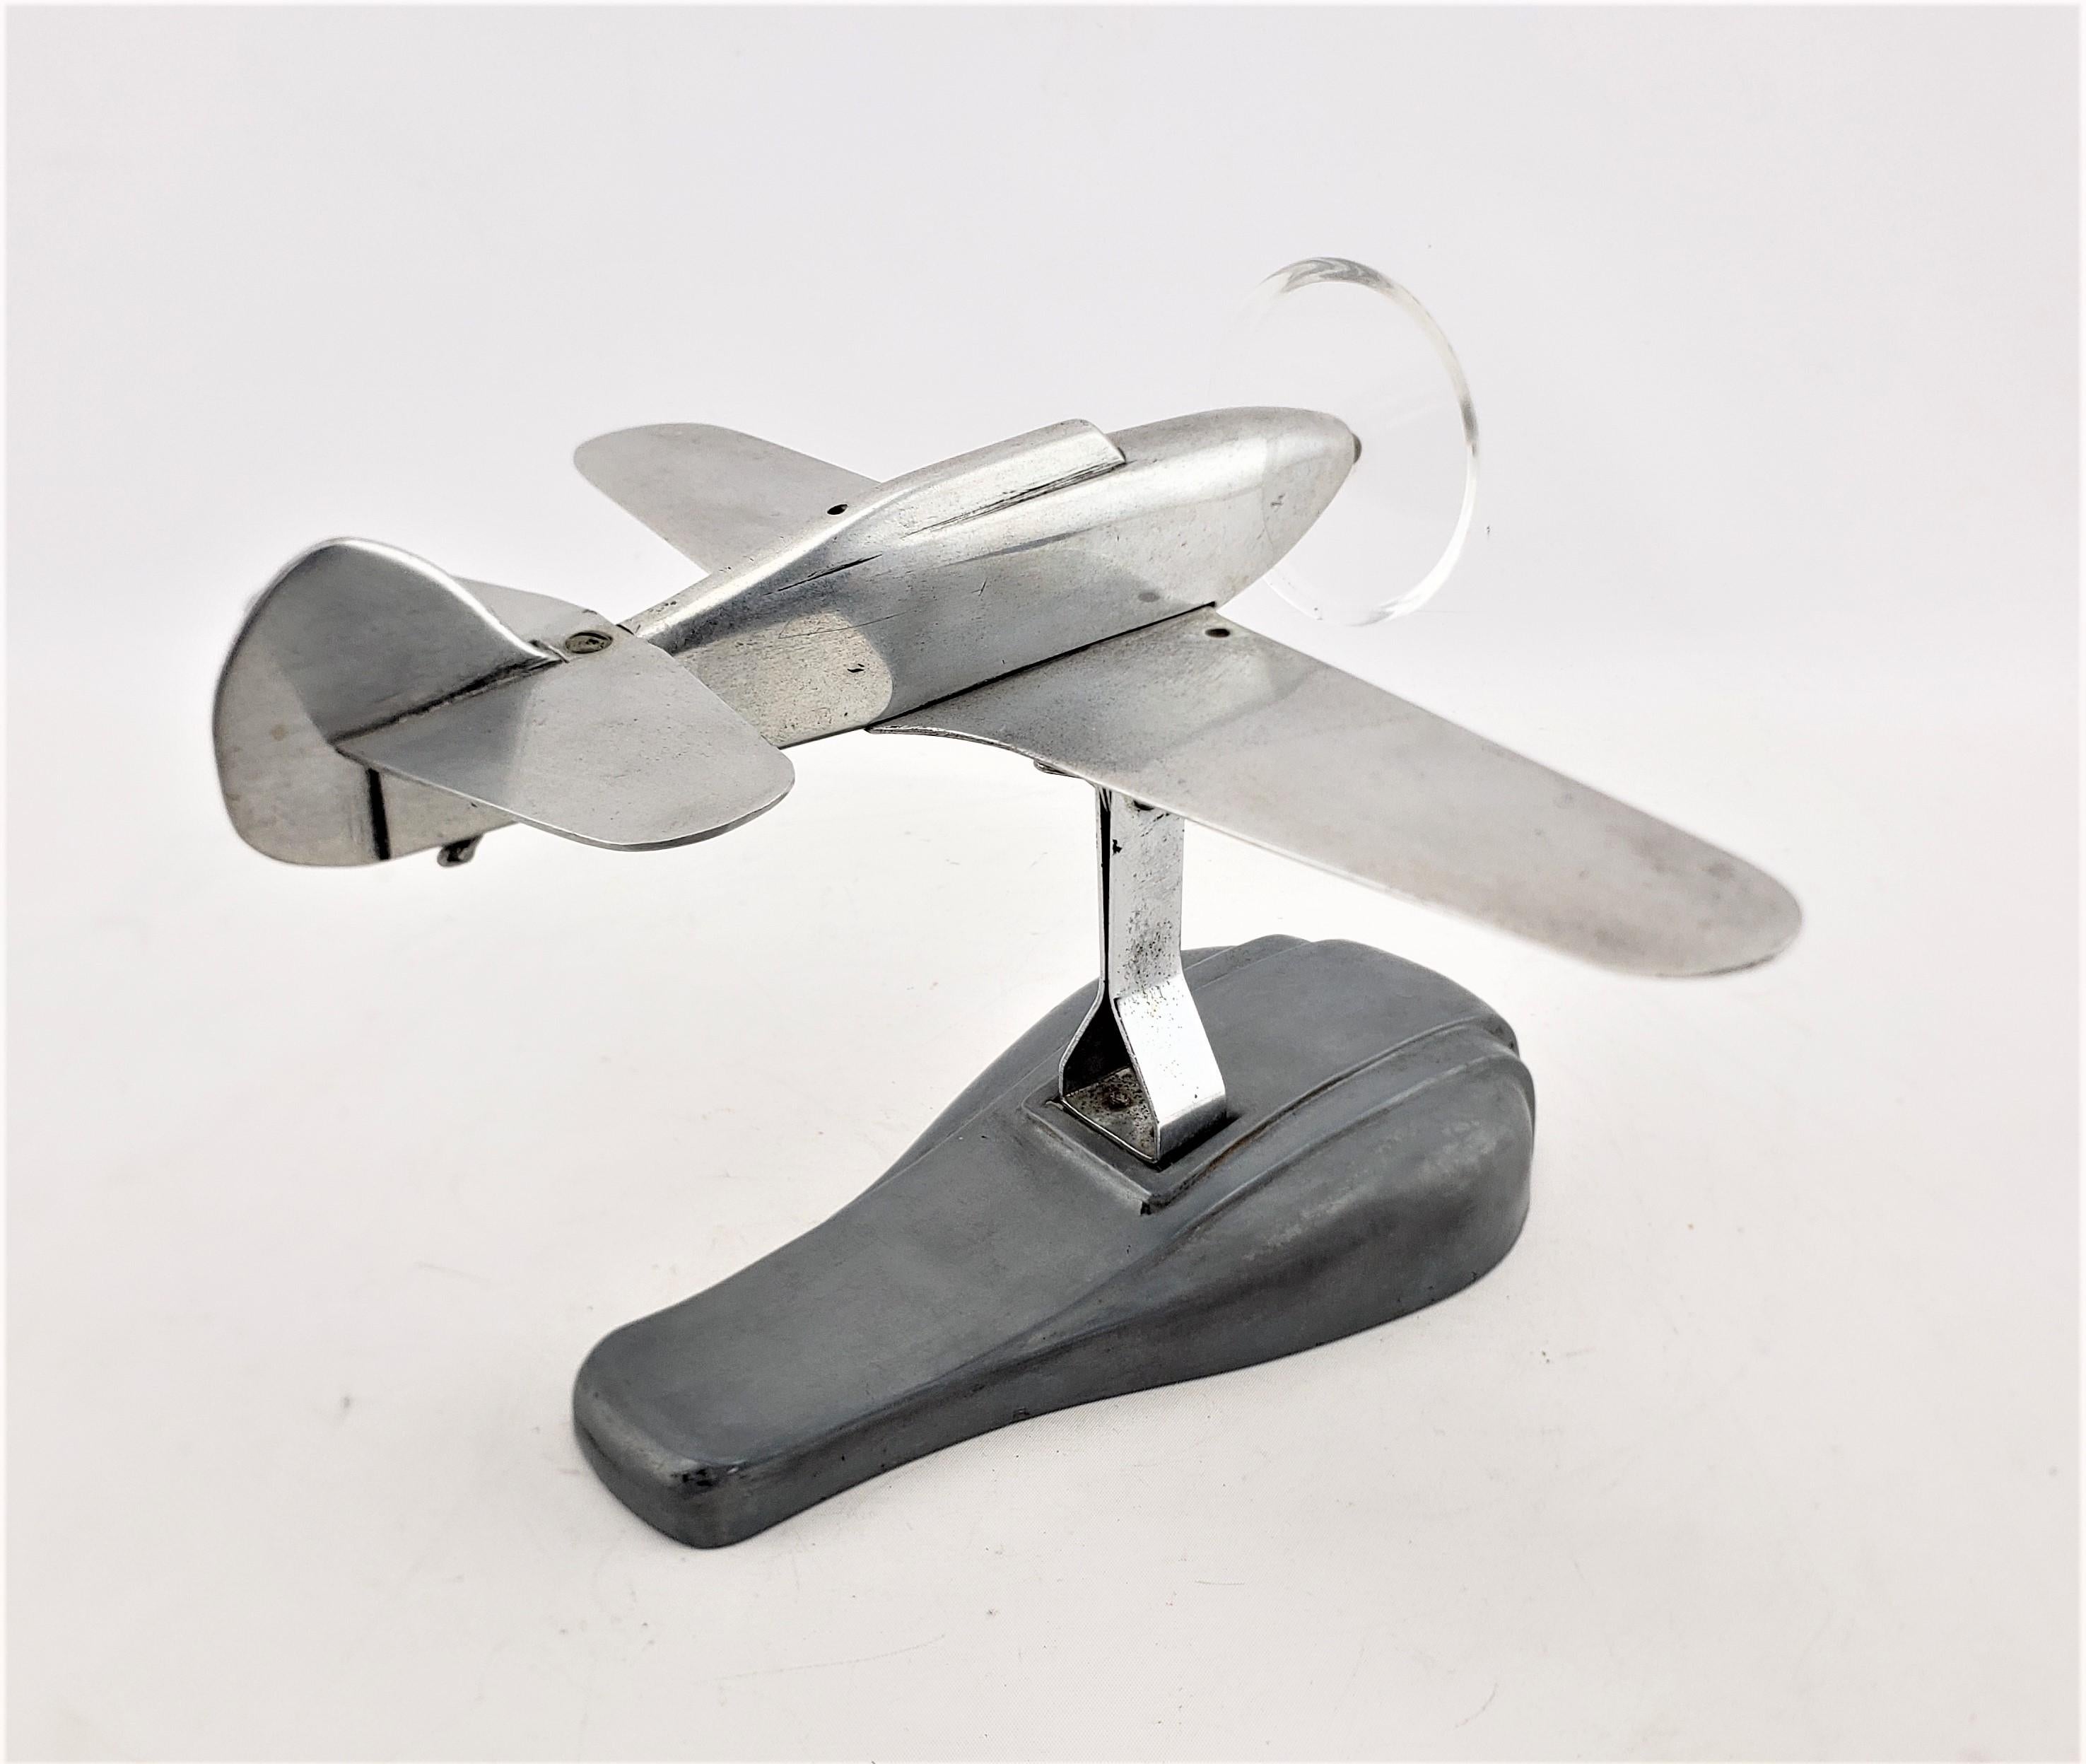 Mid-Century Modern Cast Aluminum Stylized Airplane Model or Sculpture & Stand In Good Condition For Sale In Hamilton, Ontario